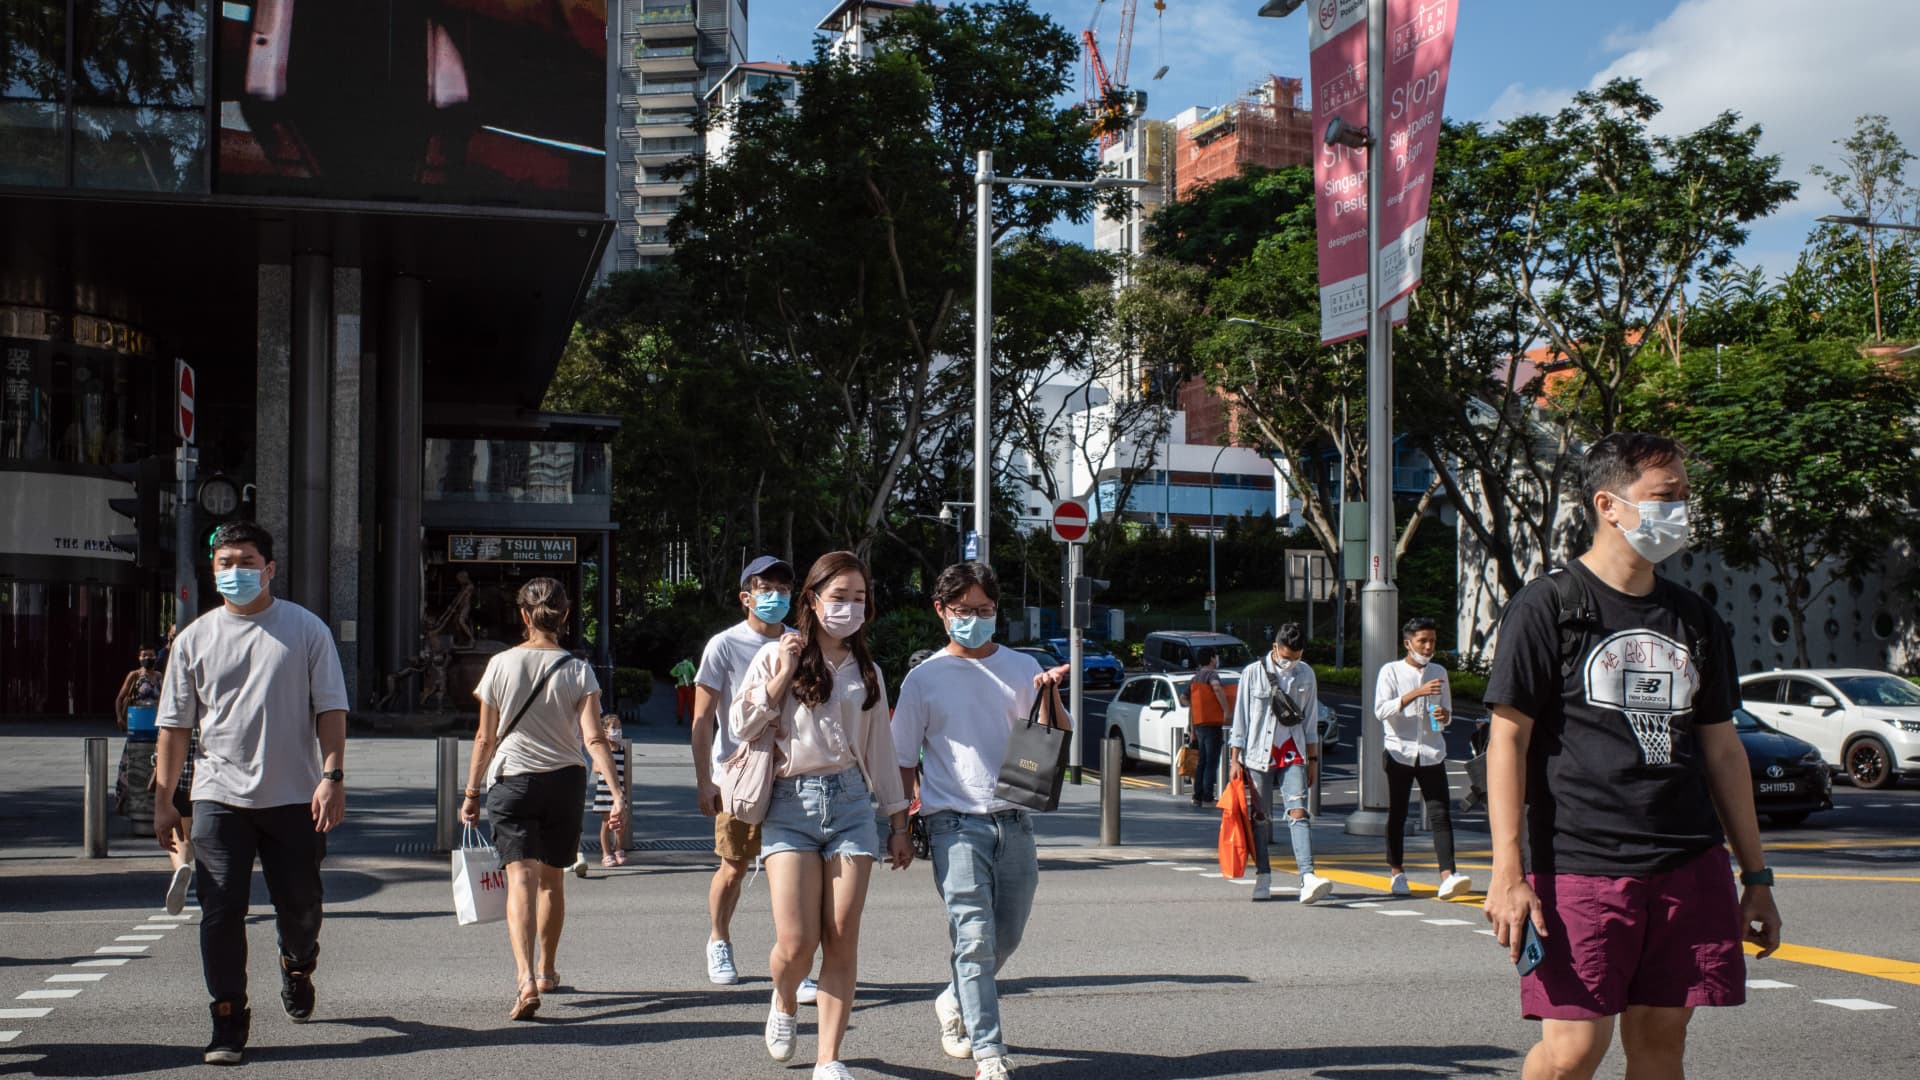 People wearing face masks as a preventive measure against the spread of Covid-19 in Singapore.